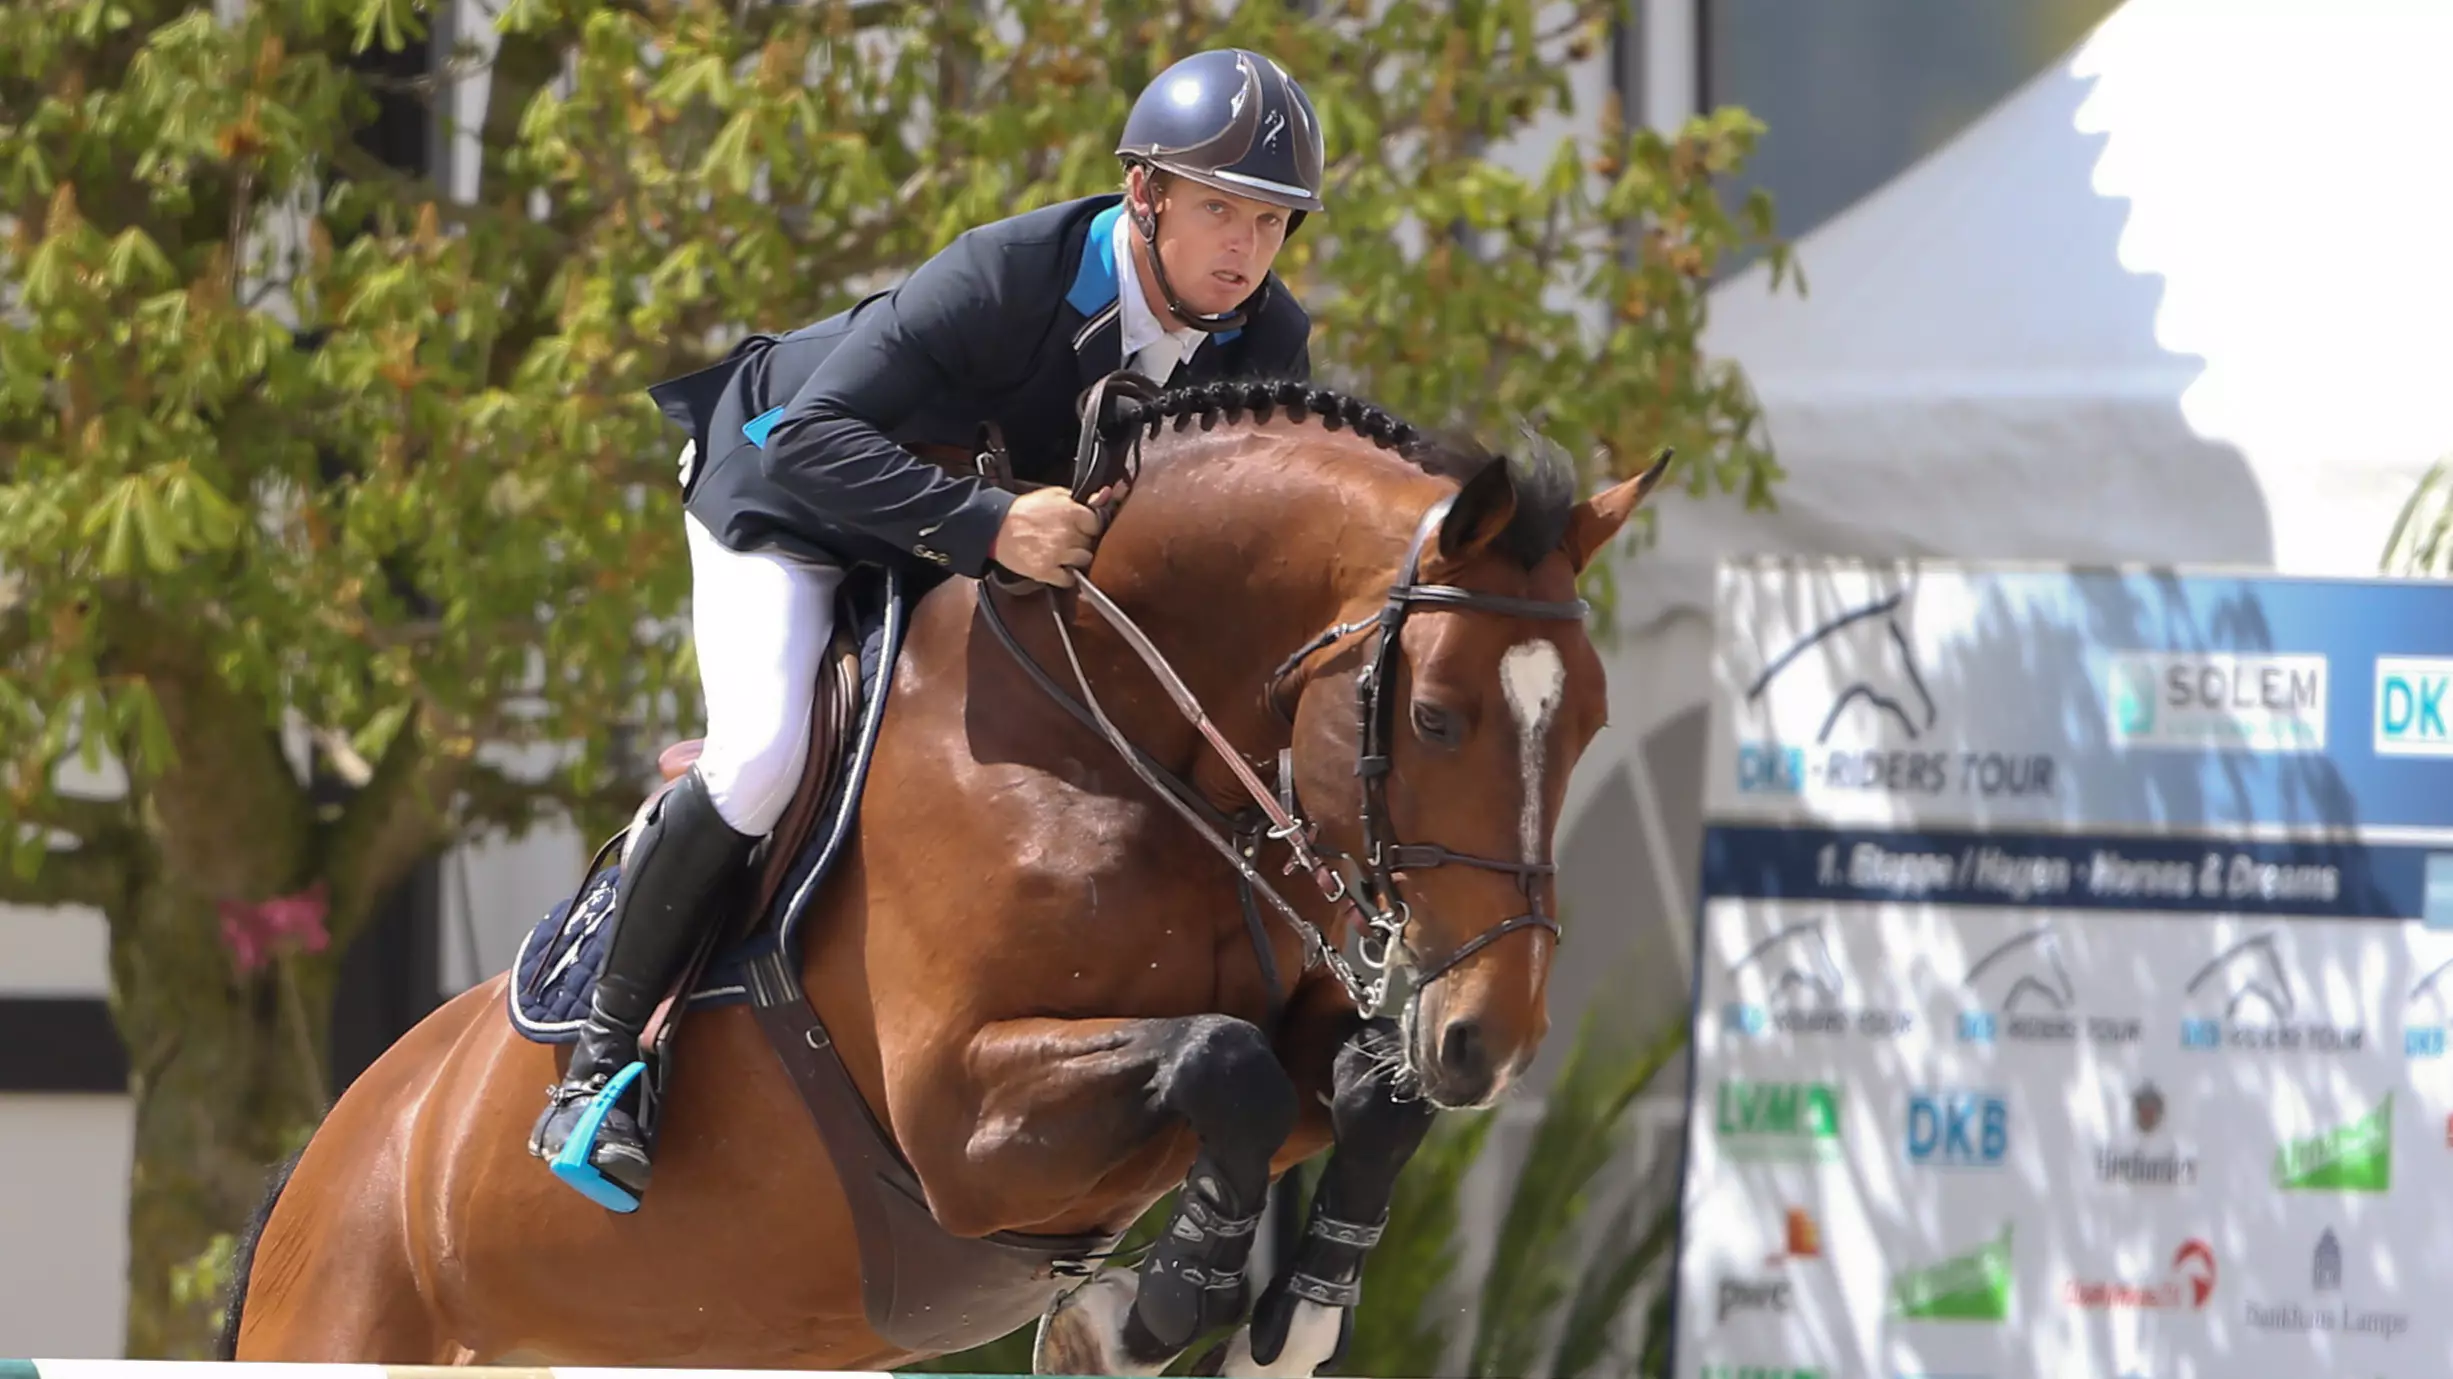 Aussie Equestrian Star Jamie Kermond Banned From Tokyo Olympics After Positive Cocaine Test